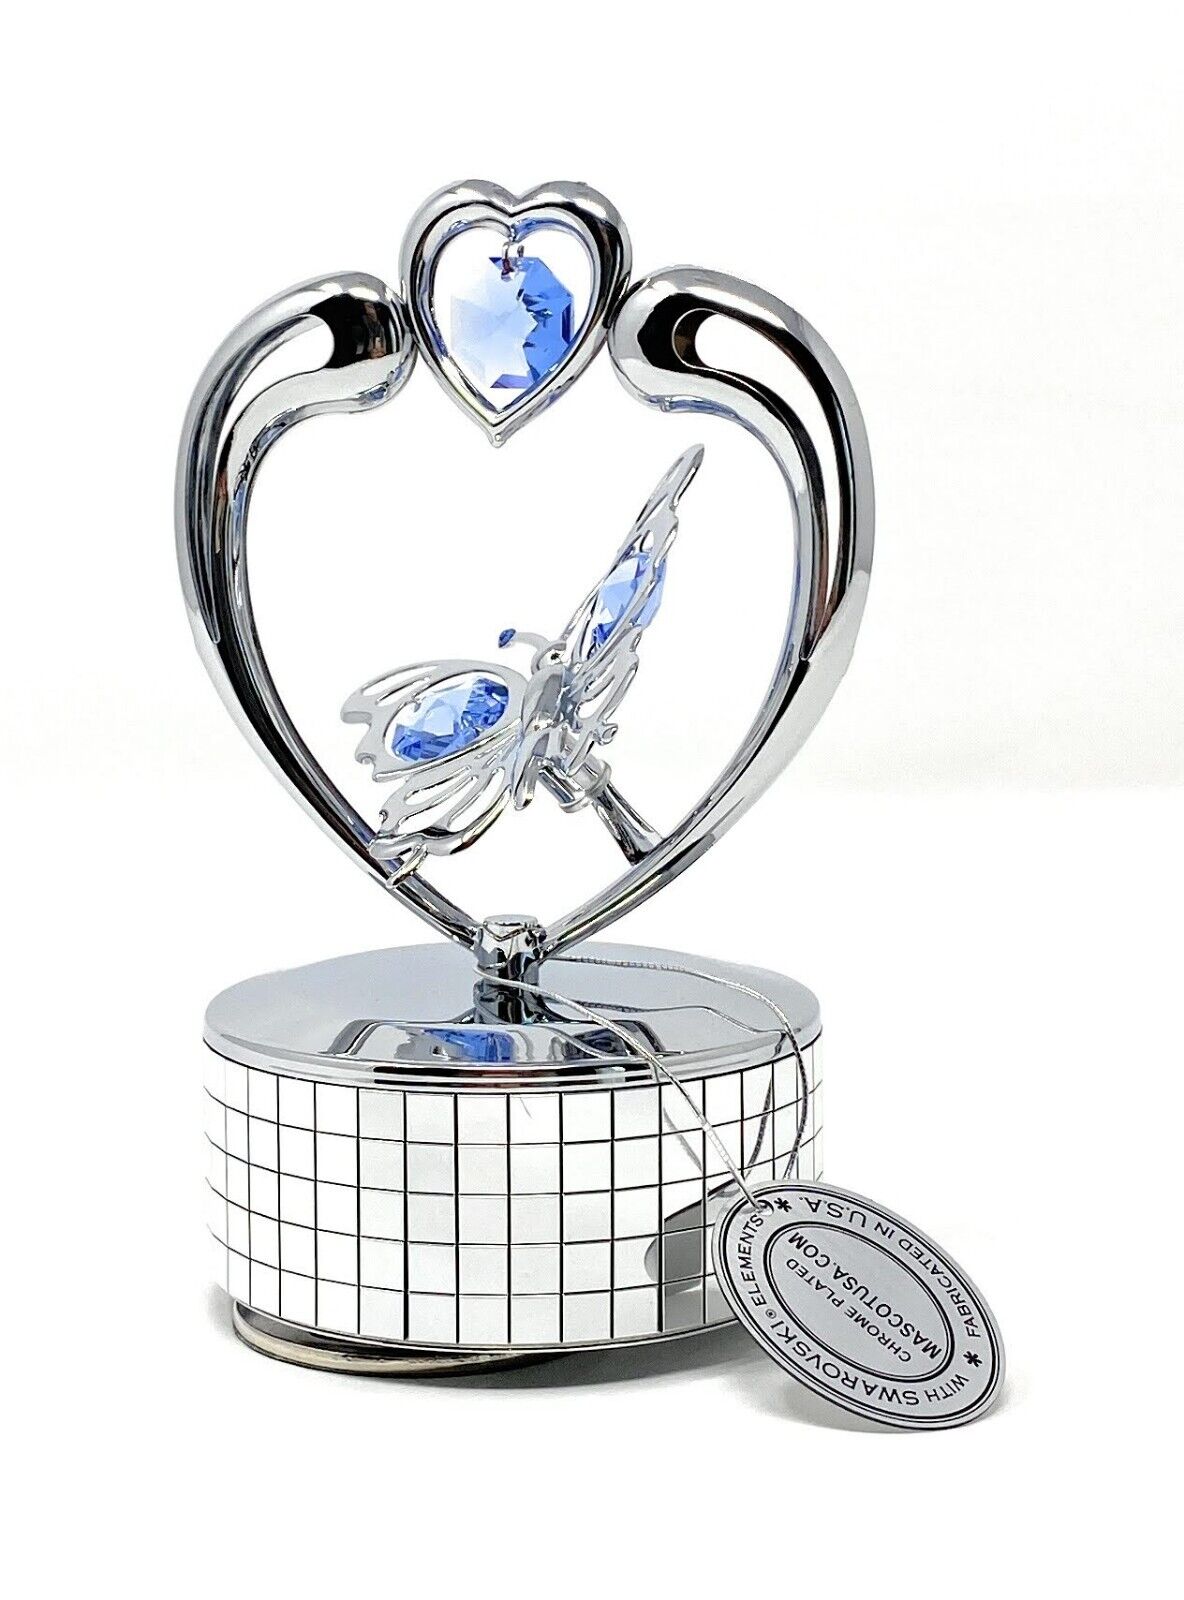 Butterfly Heart Music Box Chrome Plated w/ Swarovski Elements by Mascot, Blue